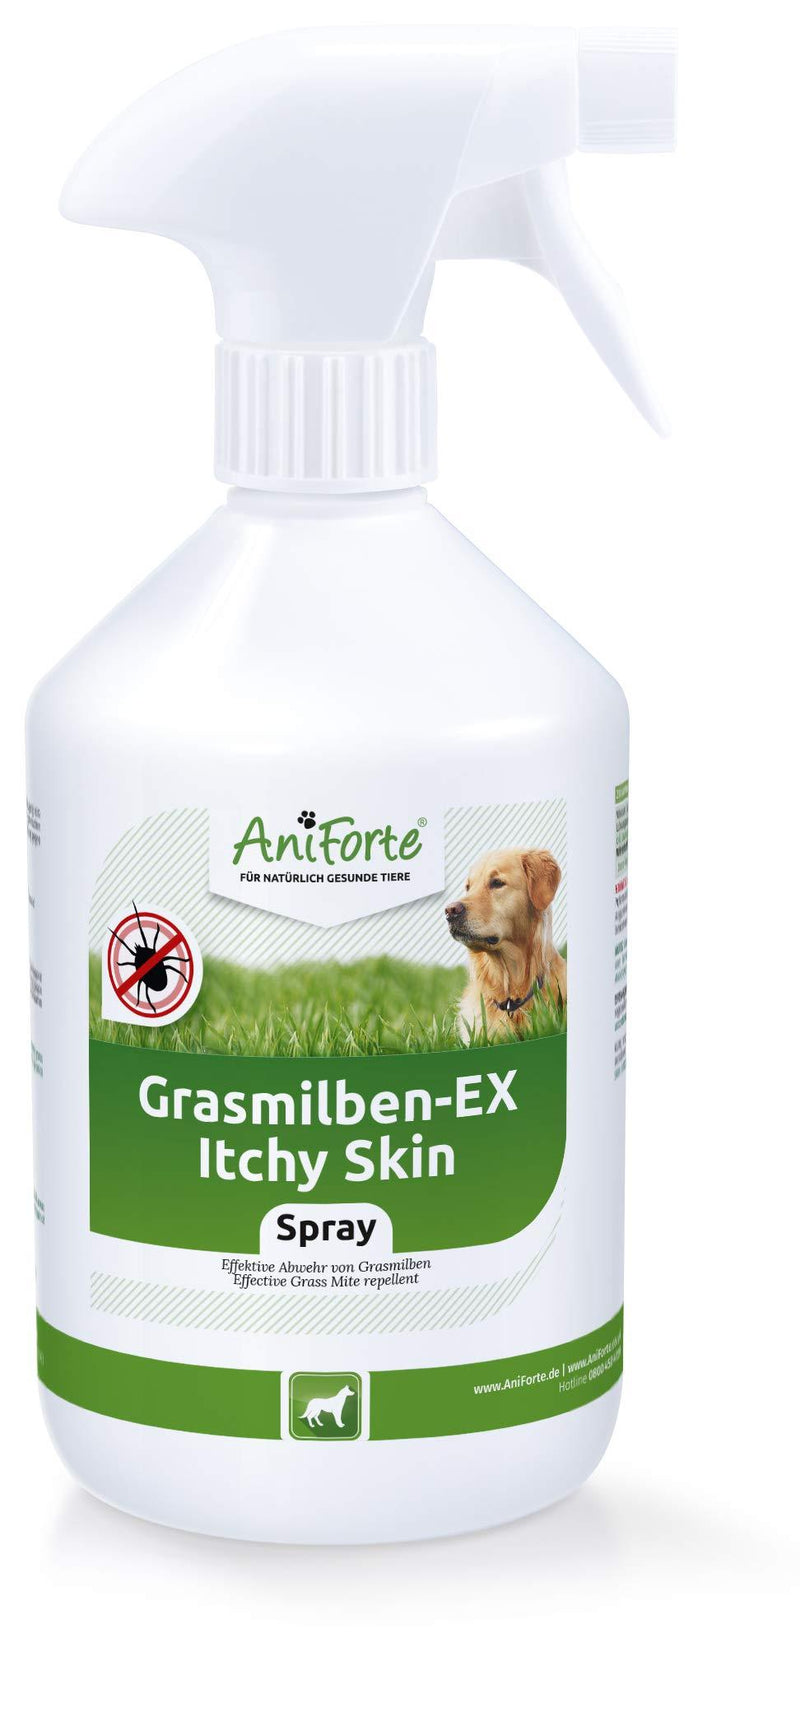 AniForte 100% Natural Itchy Skin Cure 500ml for Dogs - Stop Itchy Dog Skin, Endorsed by Vets, Natural Repellant for Dogs, Stop Irritated Dog Skin caused by Grass-Mites and Bites - PawsPlanet Australia